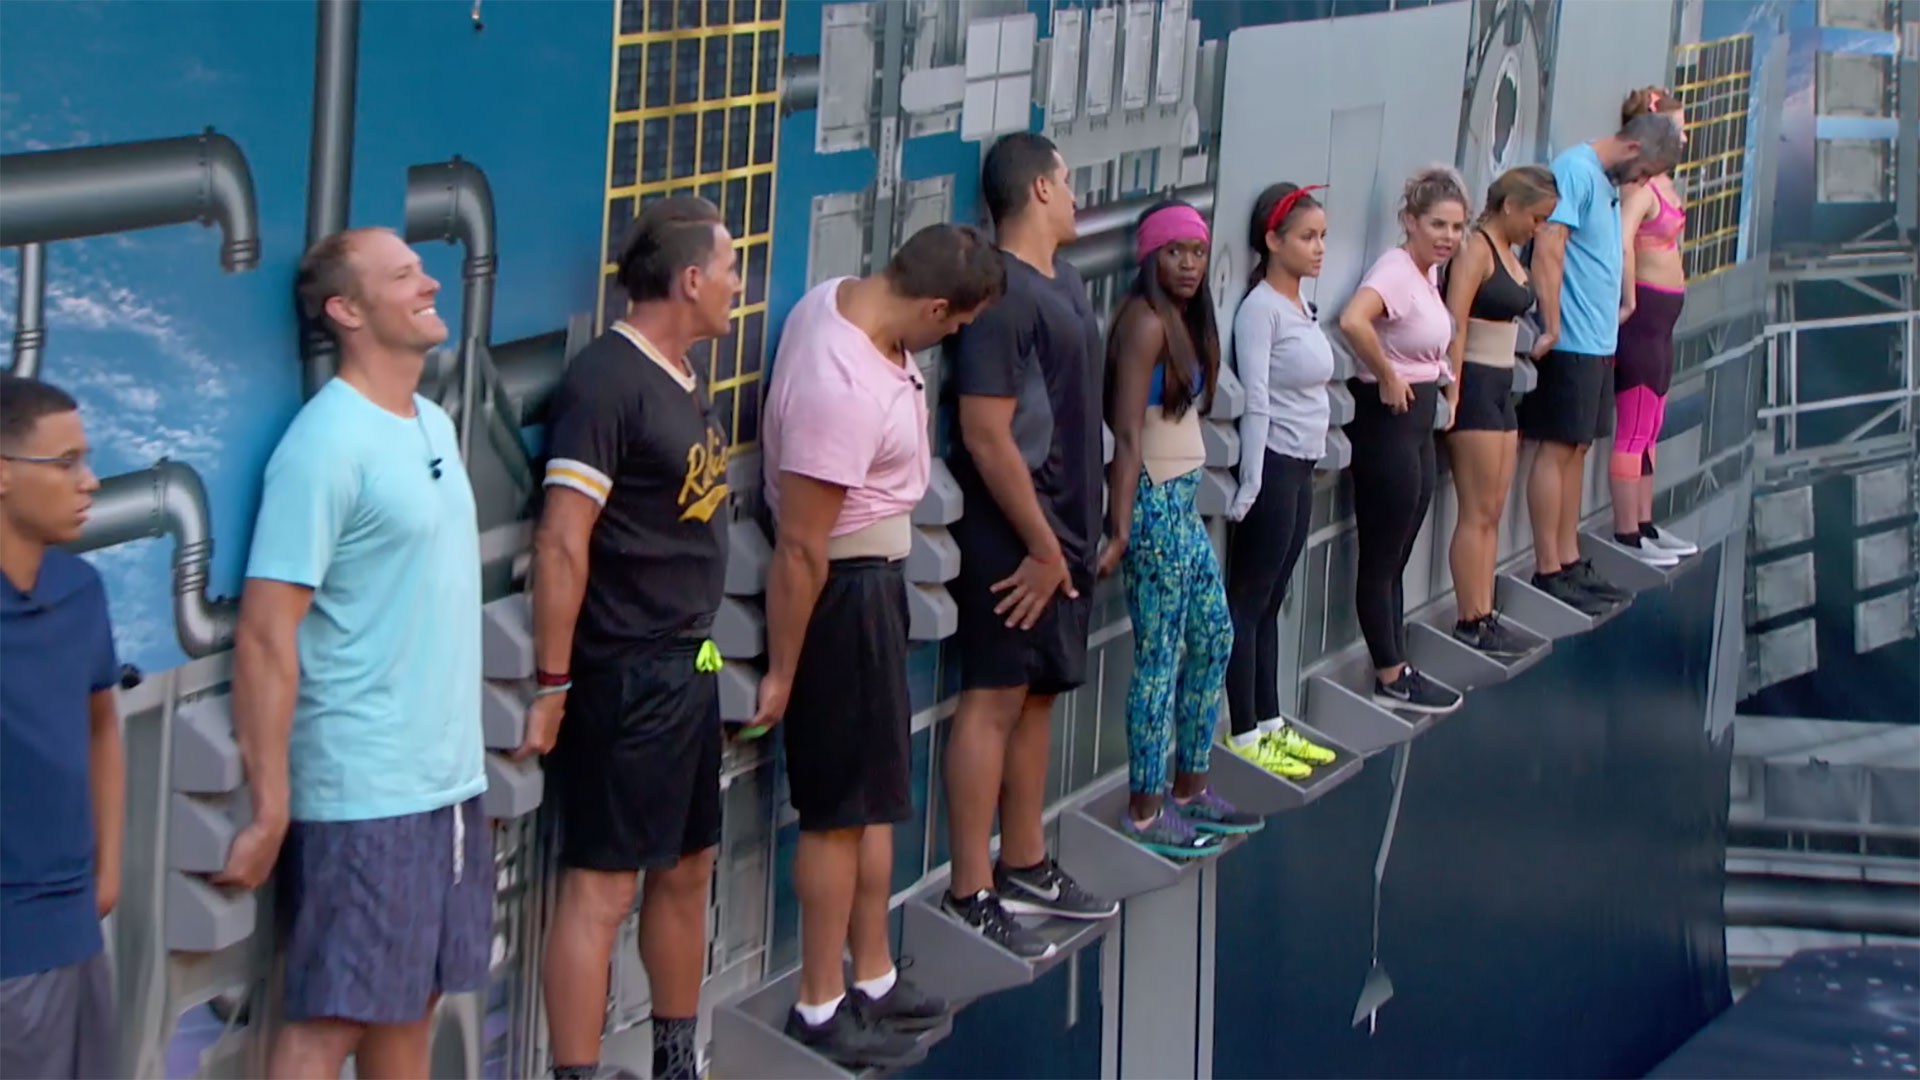 Big Brother's endurance competitions are no laughing matter